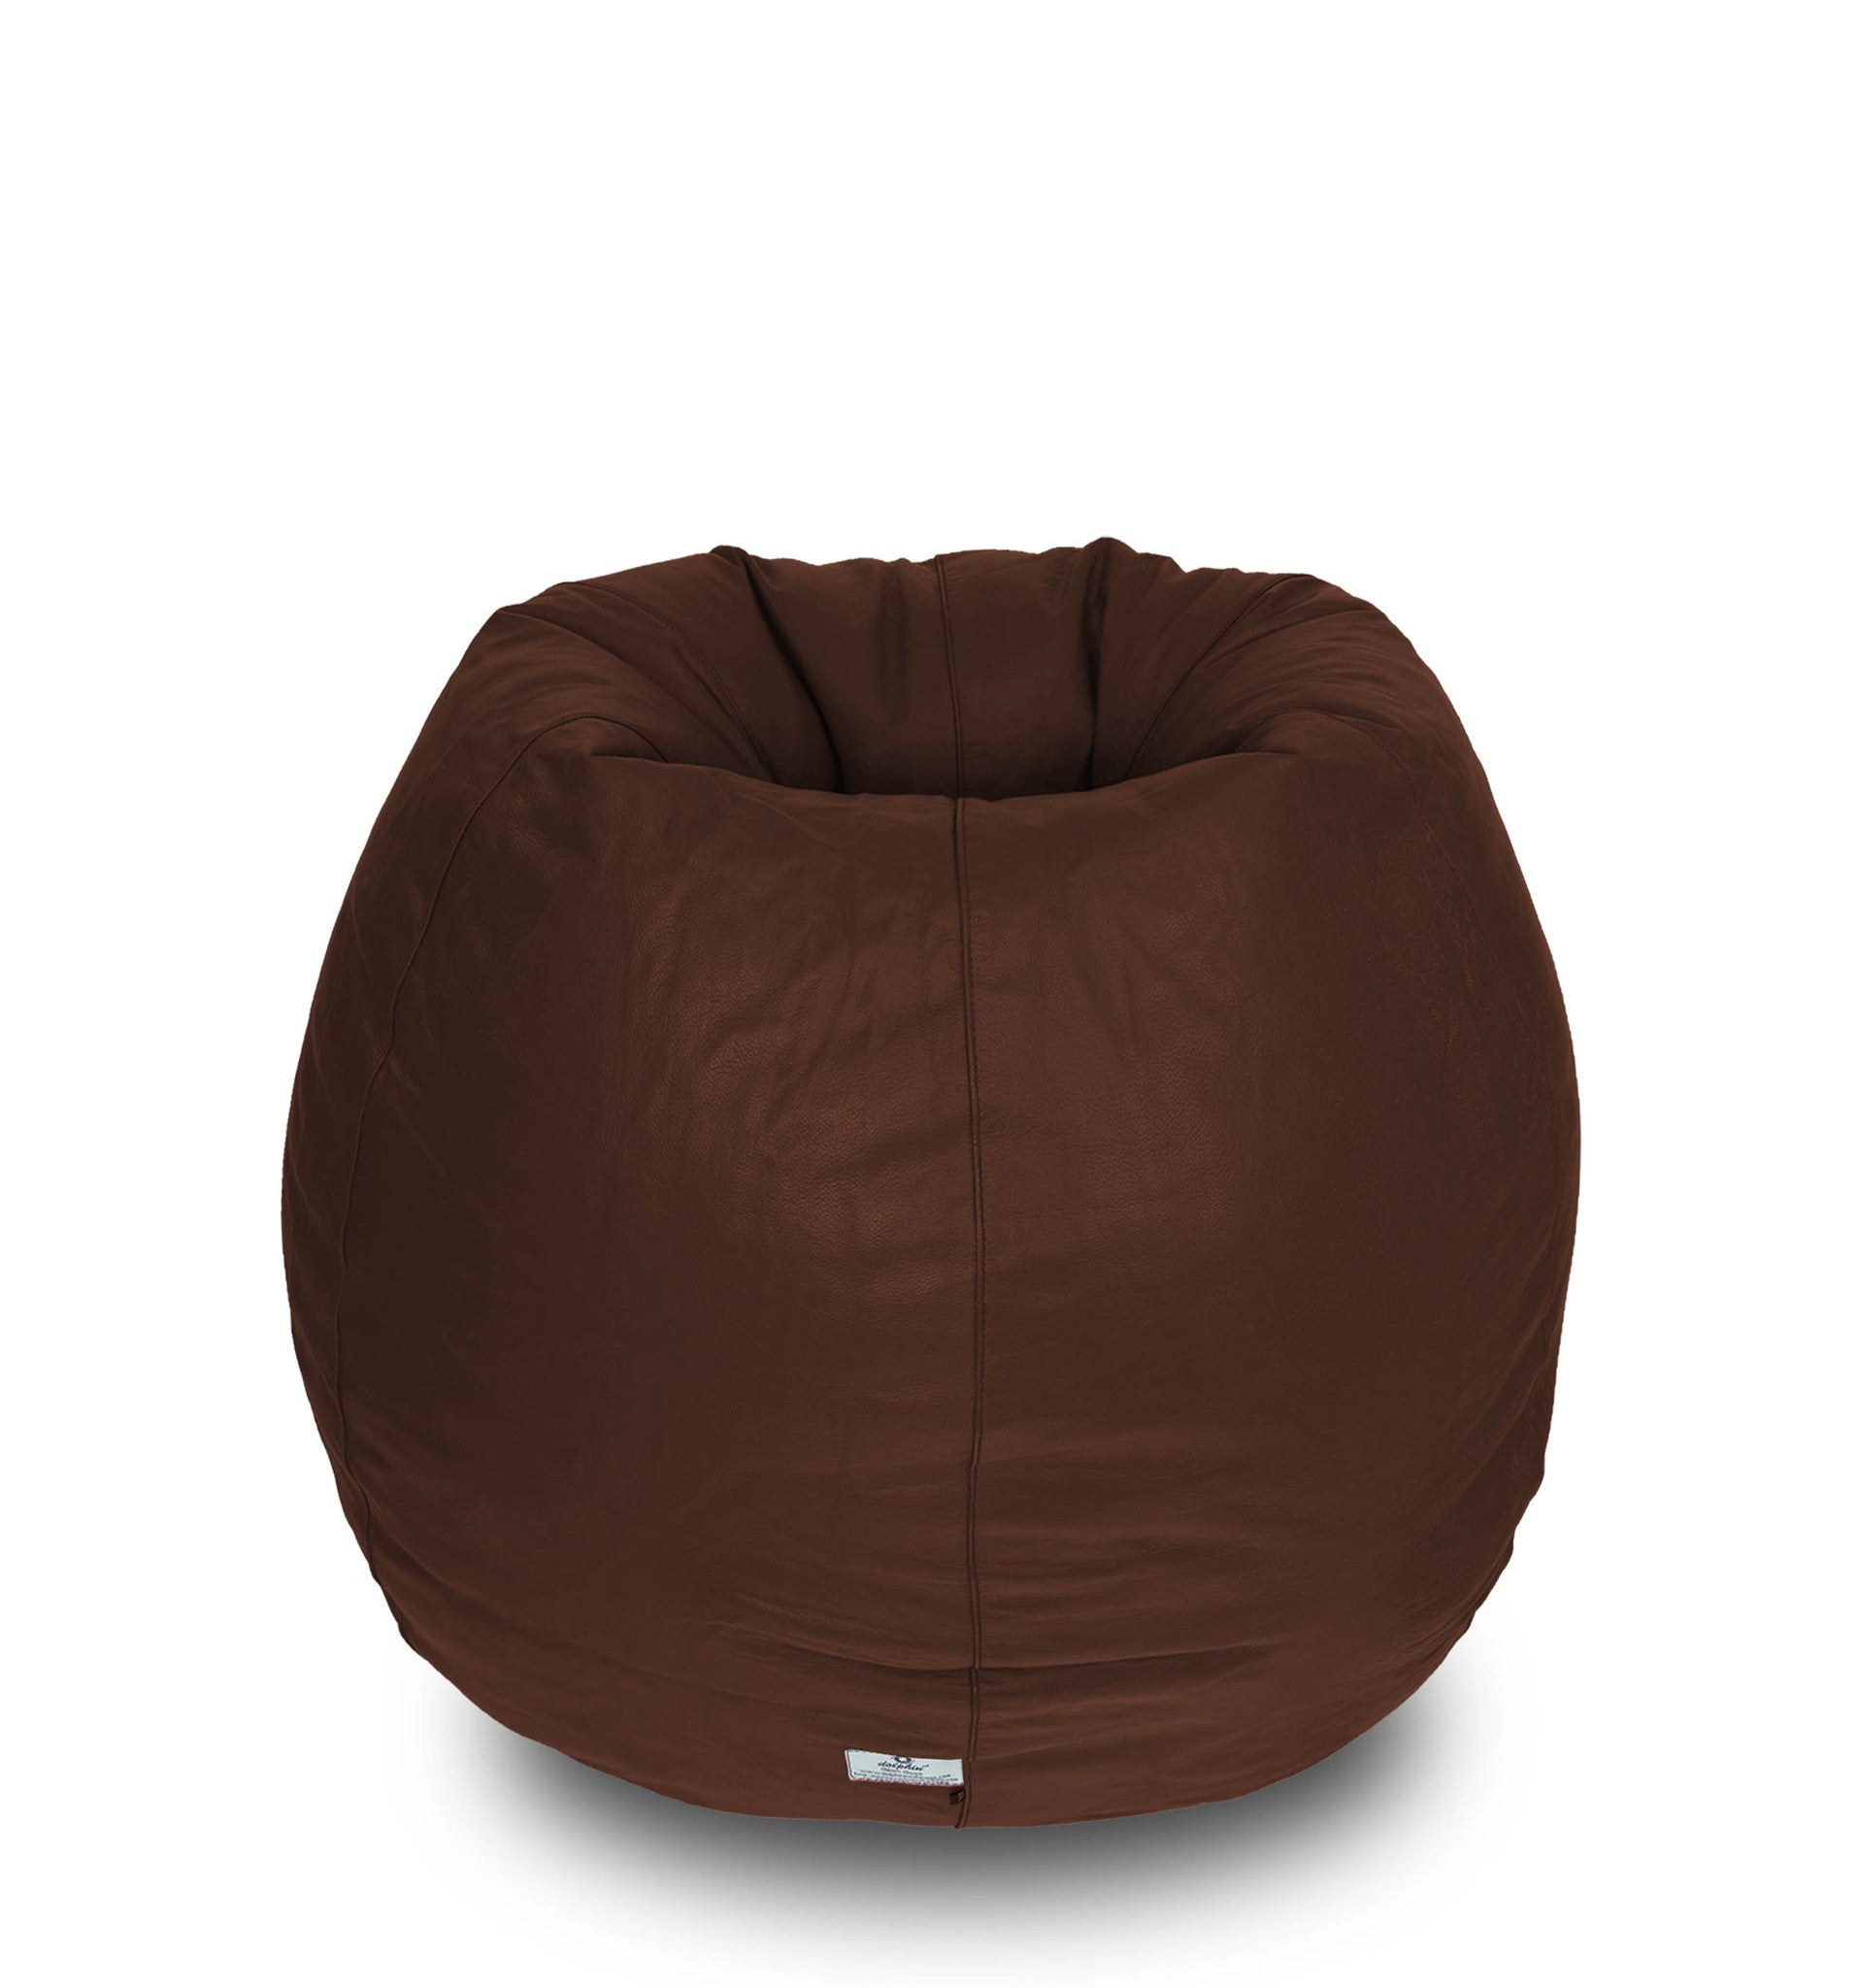 DOLPHIN XXL BEAN BAG-Maroon-COVER (Without Beans) – Dolphin Bean Bags